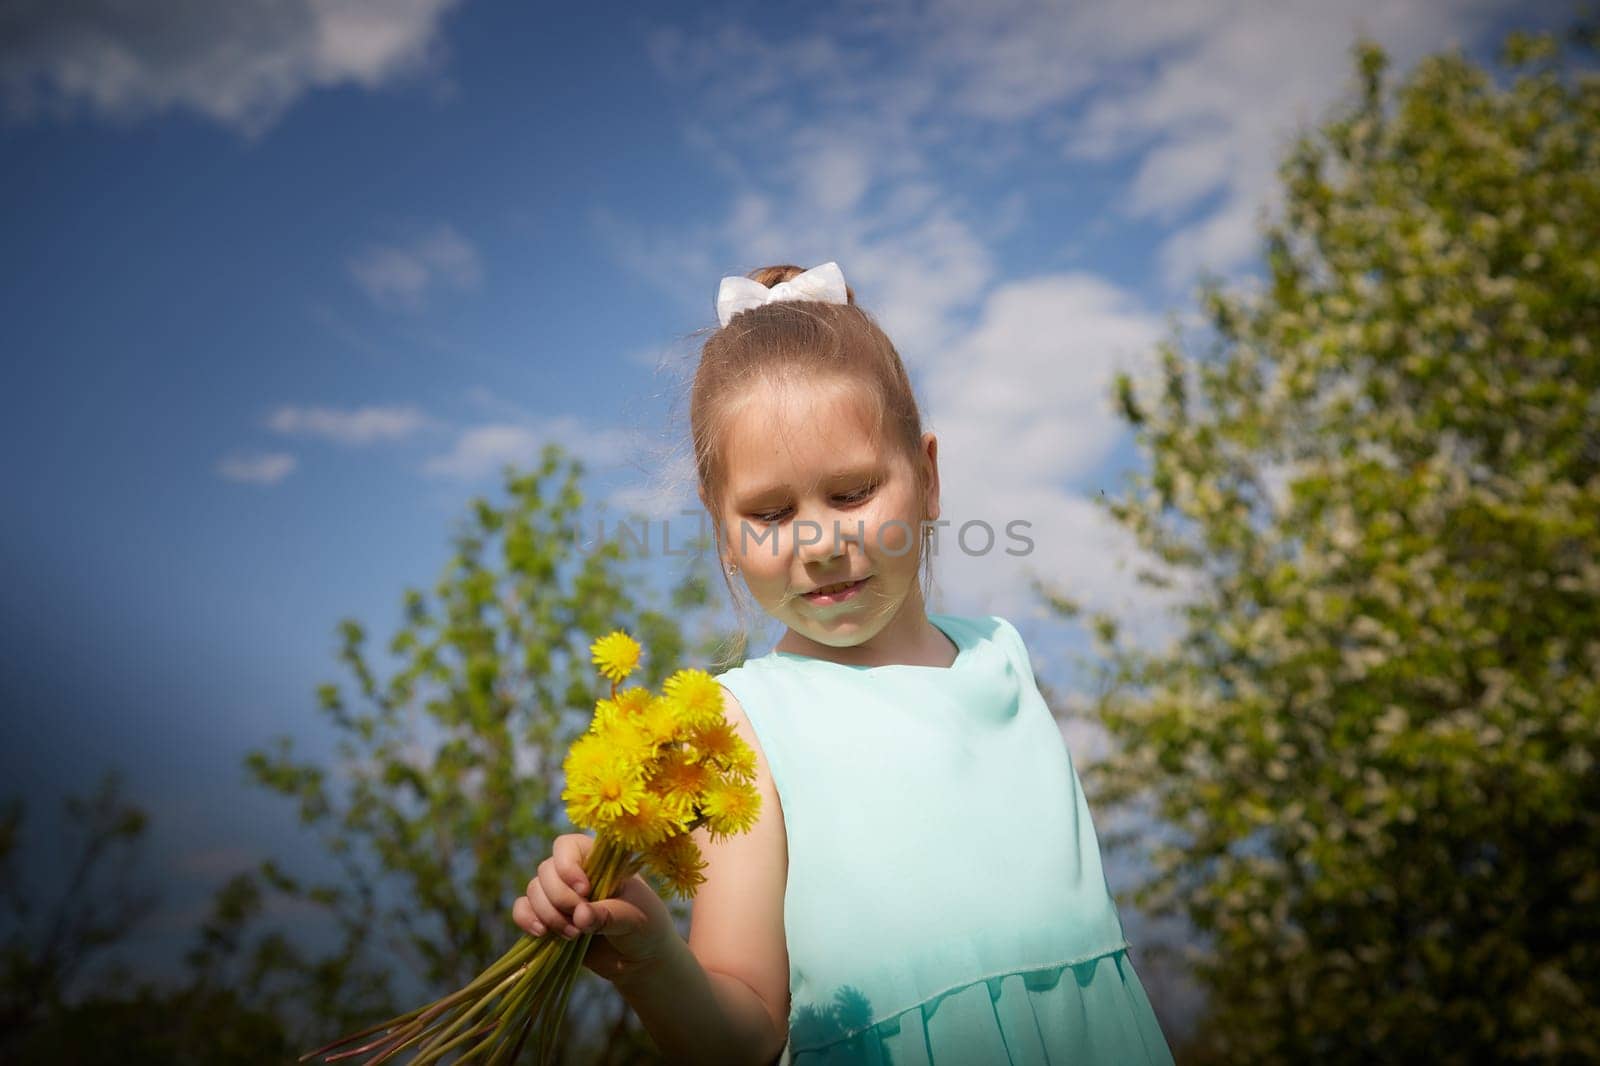 Little girl with a bouquet of yellow dandelion flowers and green trees with a blue sky in the background. Portrait of a happy Baby on a sunny summer day in nature